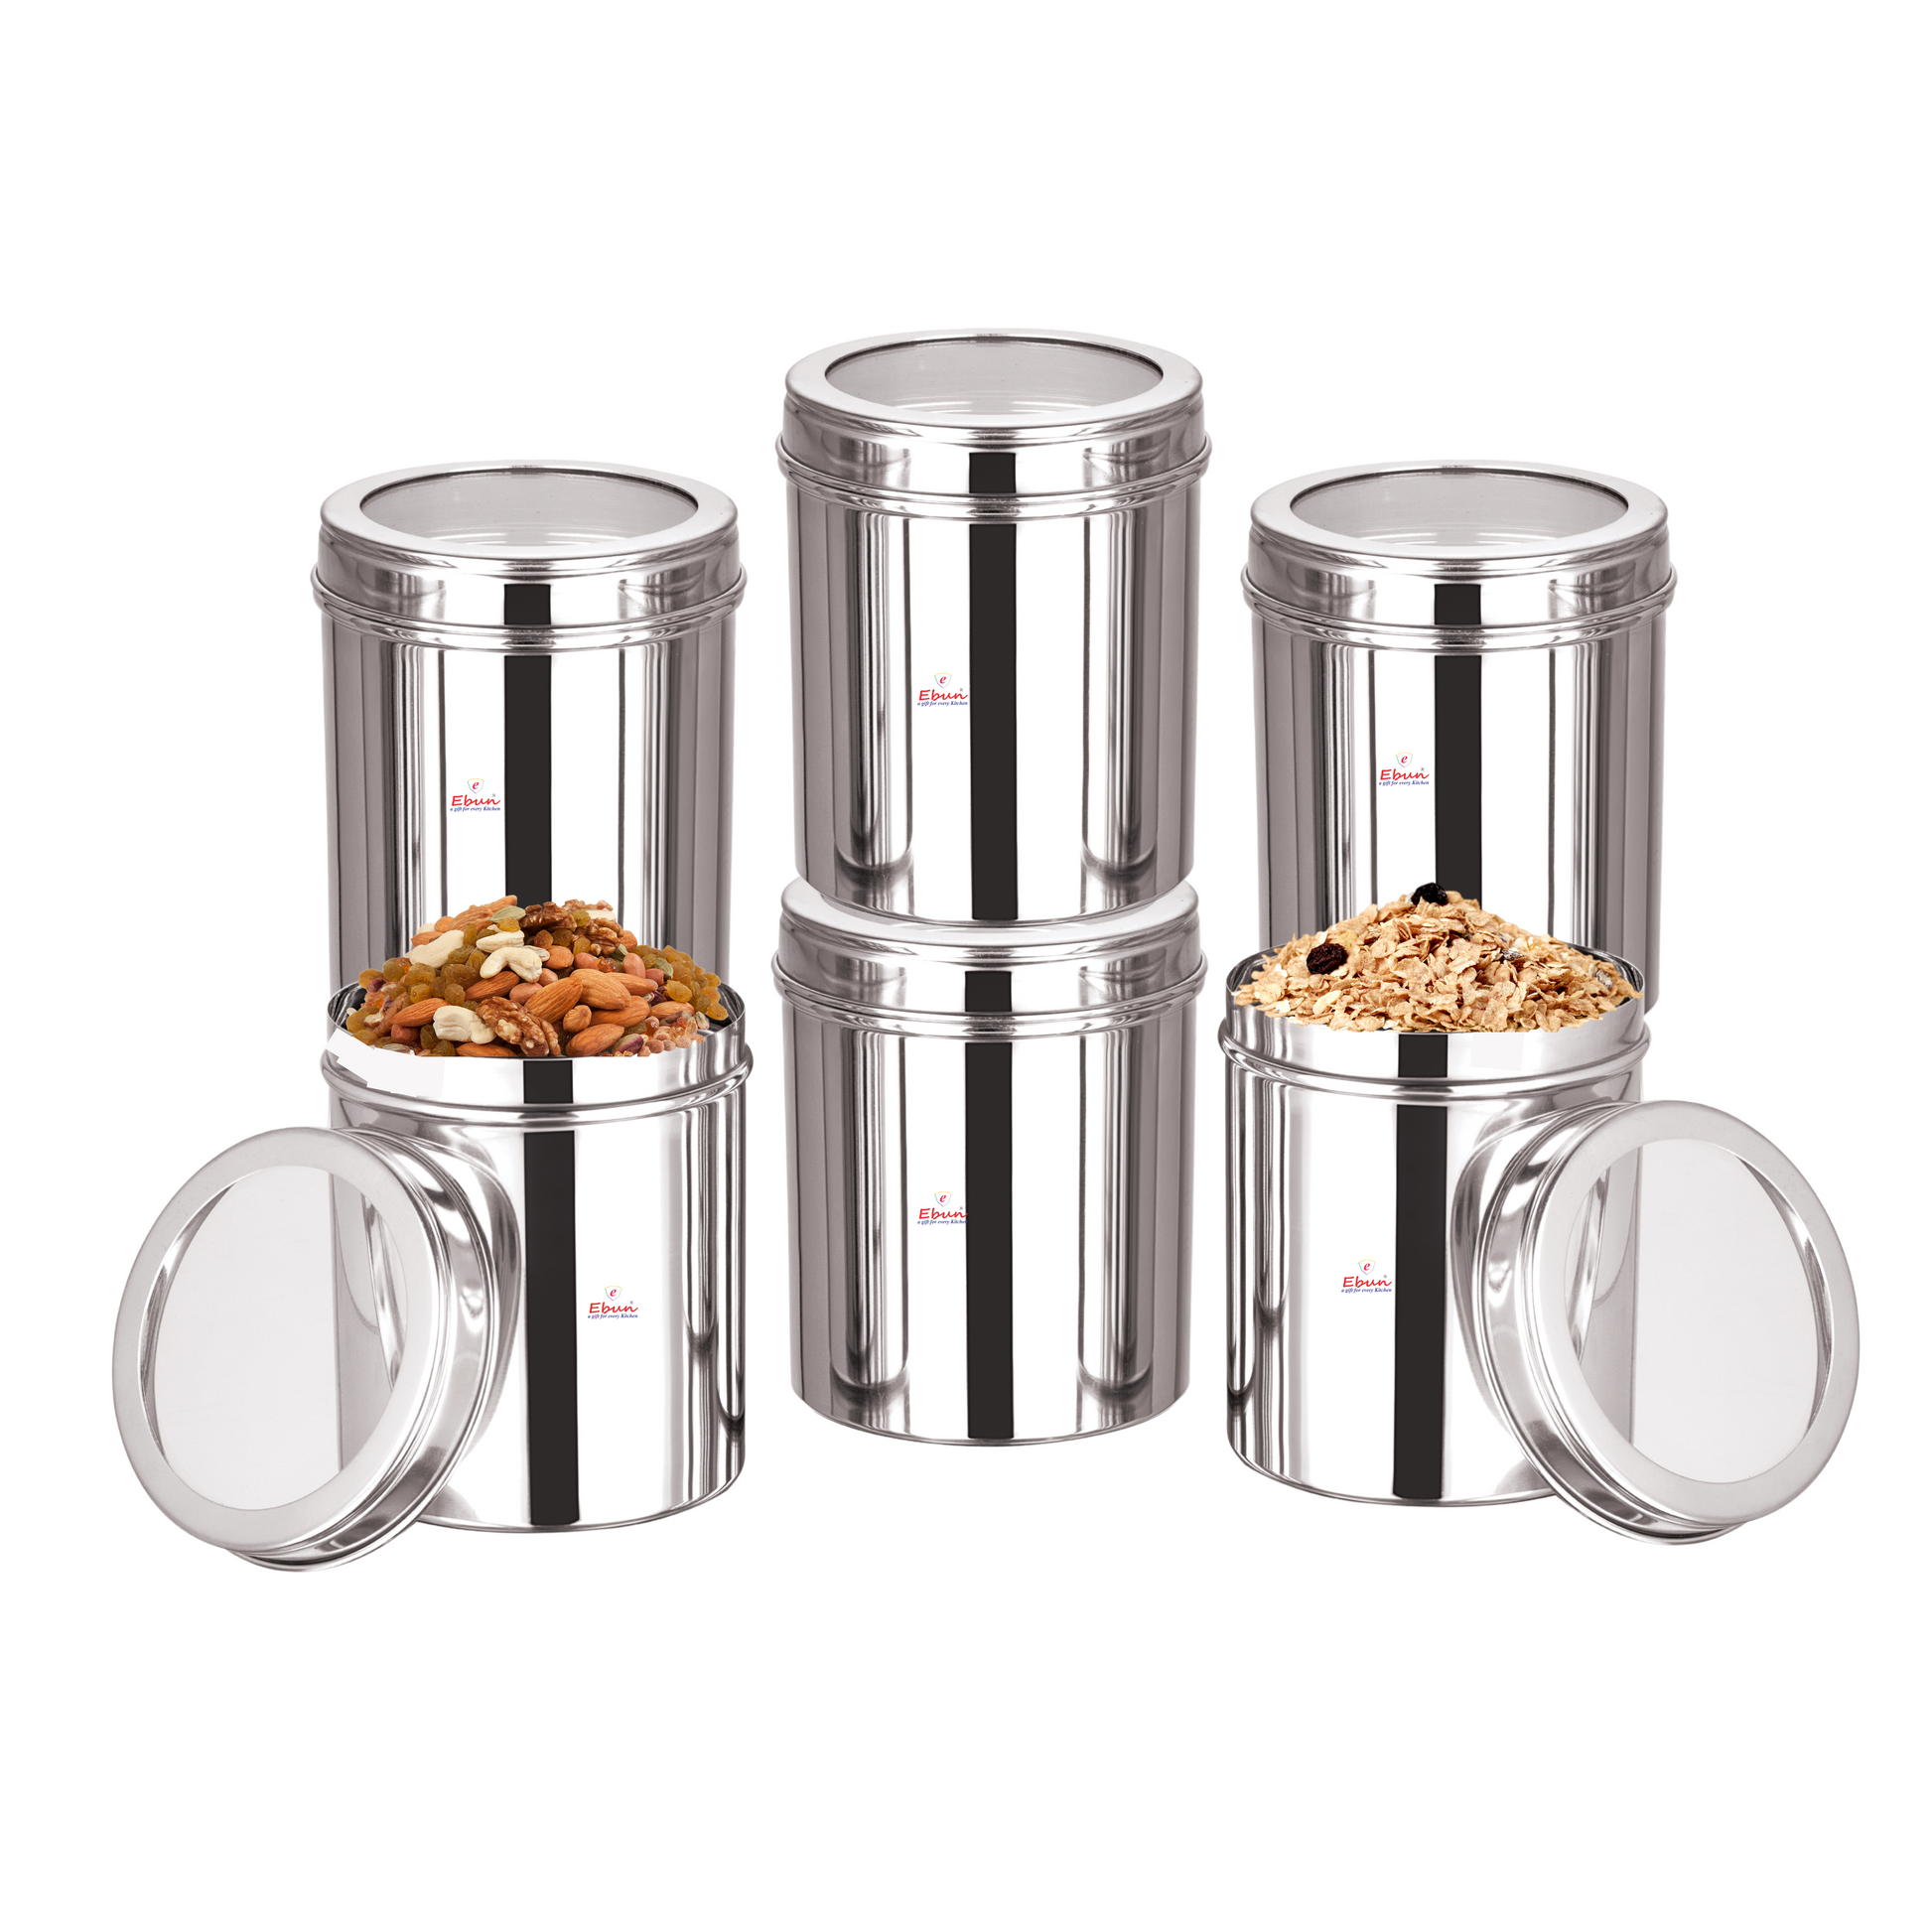 steel container | stainless steel containers for kitchen | stainless steel containers | steel storage containers for kitchen | steel container | steel container with lid | kitchen containers set steel | steel container for kitchen storage set | steel containers | stainless steel storage containers |  stainless steel containers with lid | kitchen steel containers set | stainless steel container | steel airtight container | steel storage containers